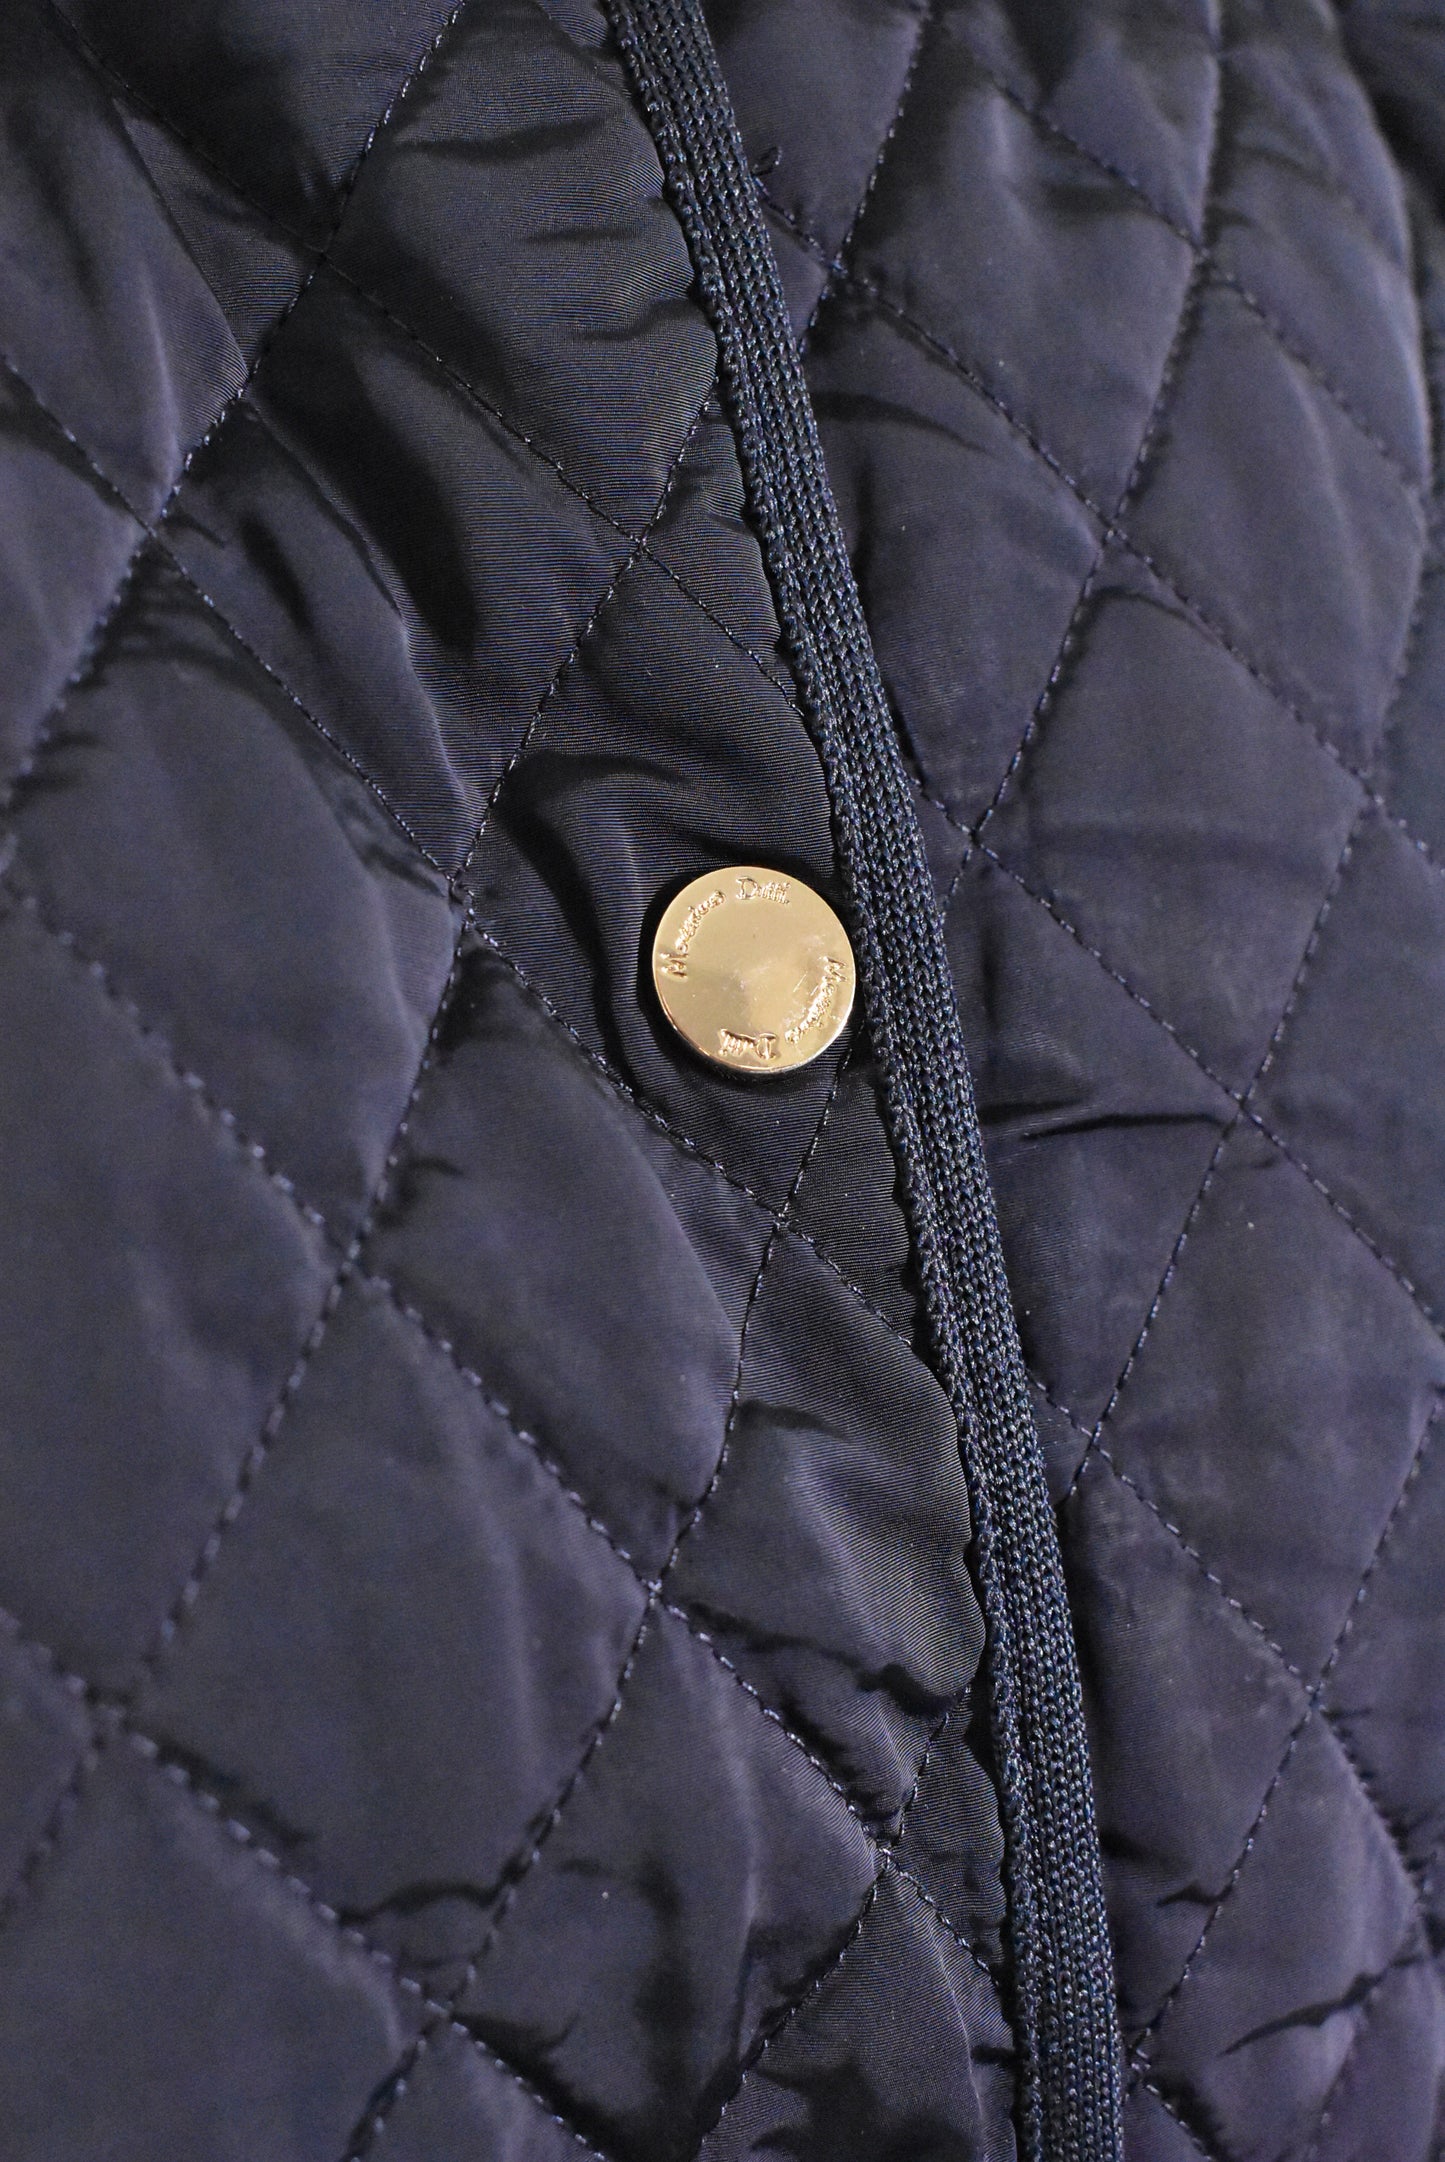 Massimo Dutti quilted jacket, M